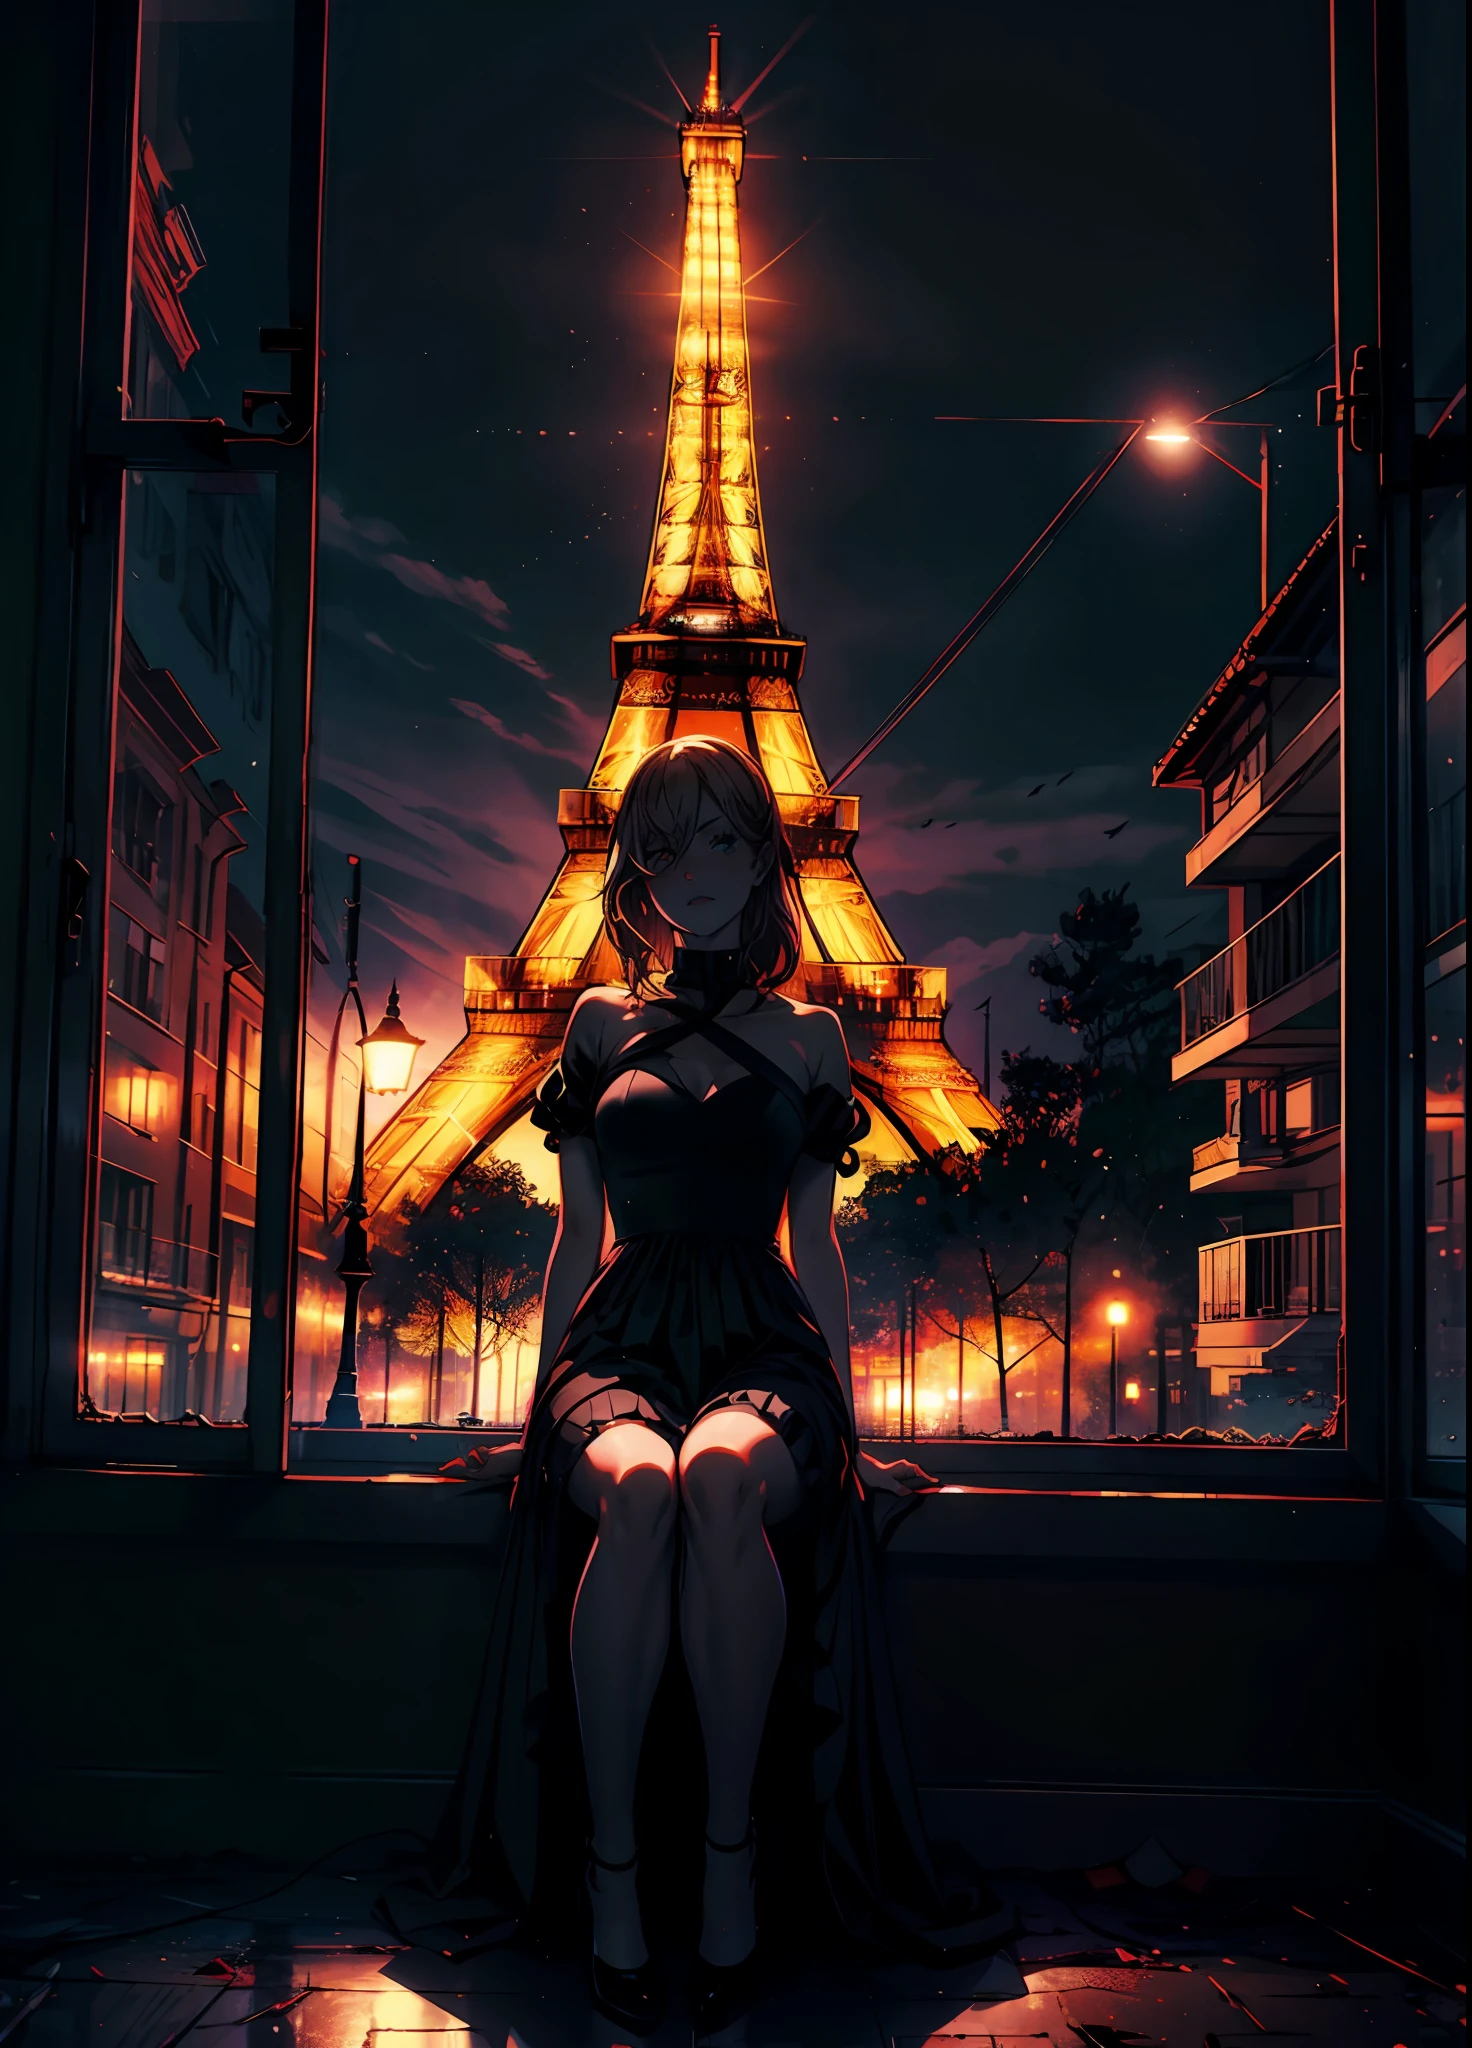 power from chainsaw wearing black evening dress, sitting on window frame, midnight, no lights in the room,  glowing eiffel tower in background